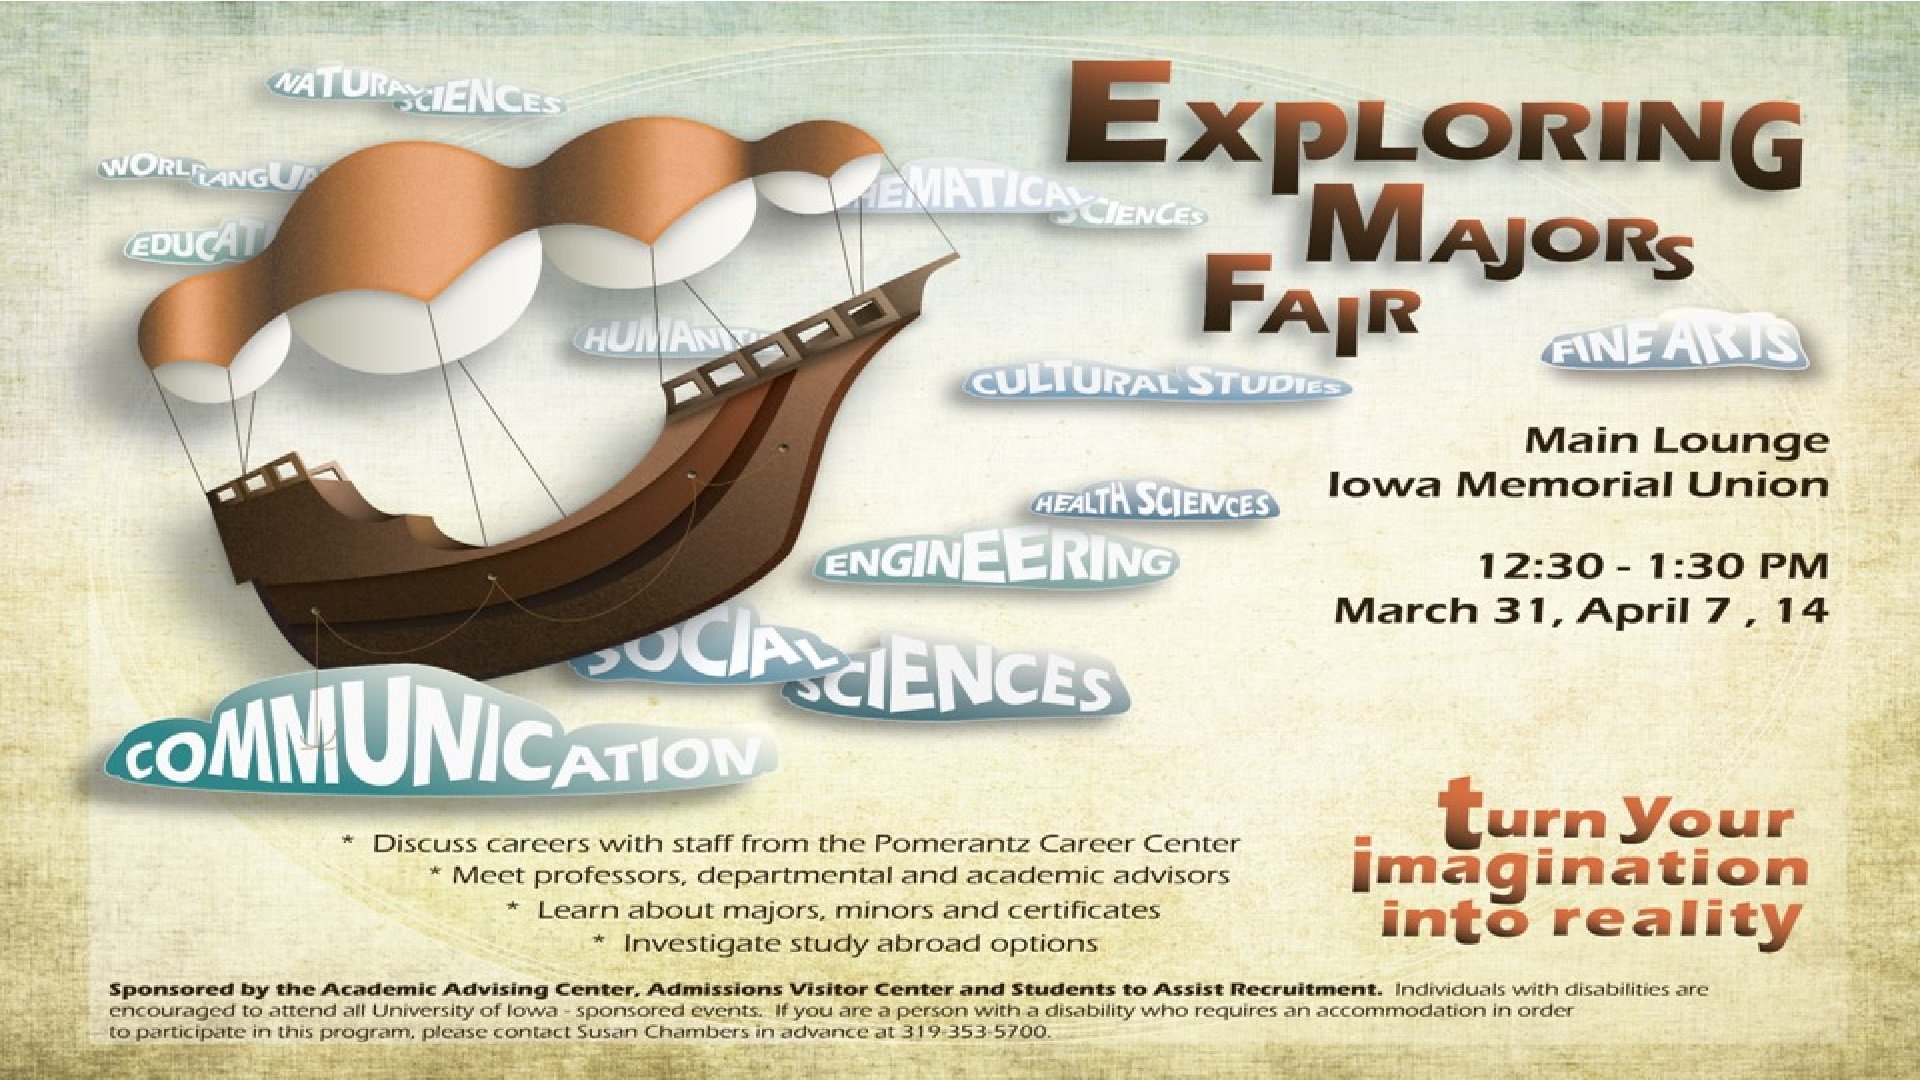 Dates and Times of Exploring Majors Fair